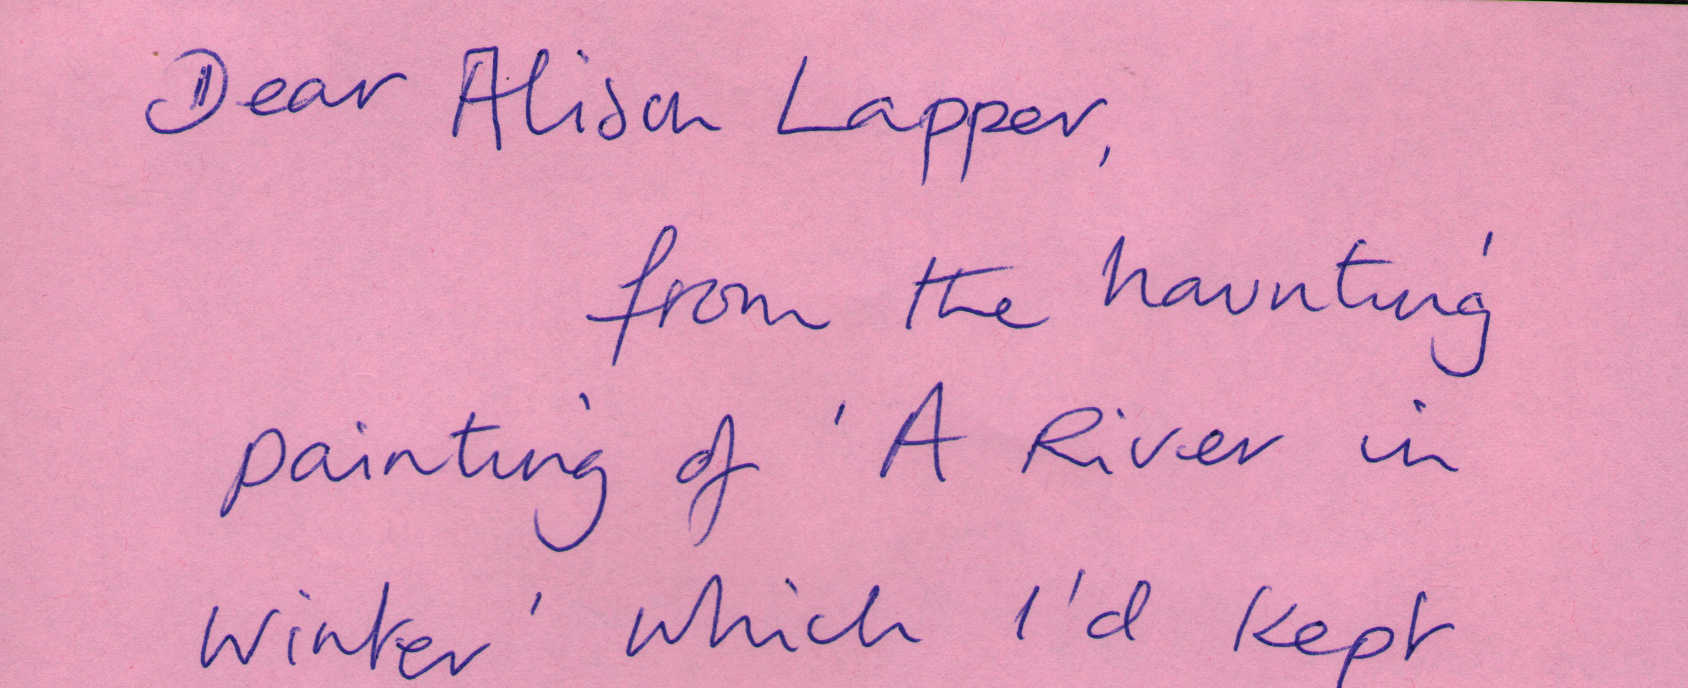 Letter to Alison Lapper from Jane McIver